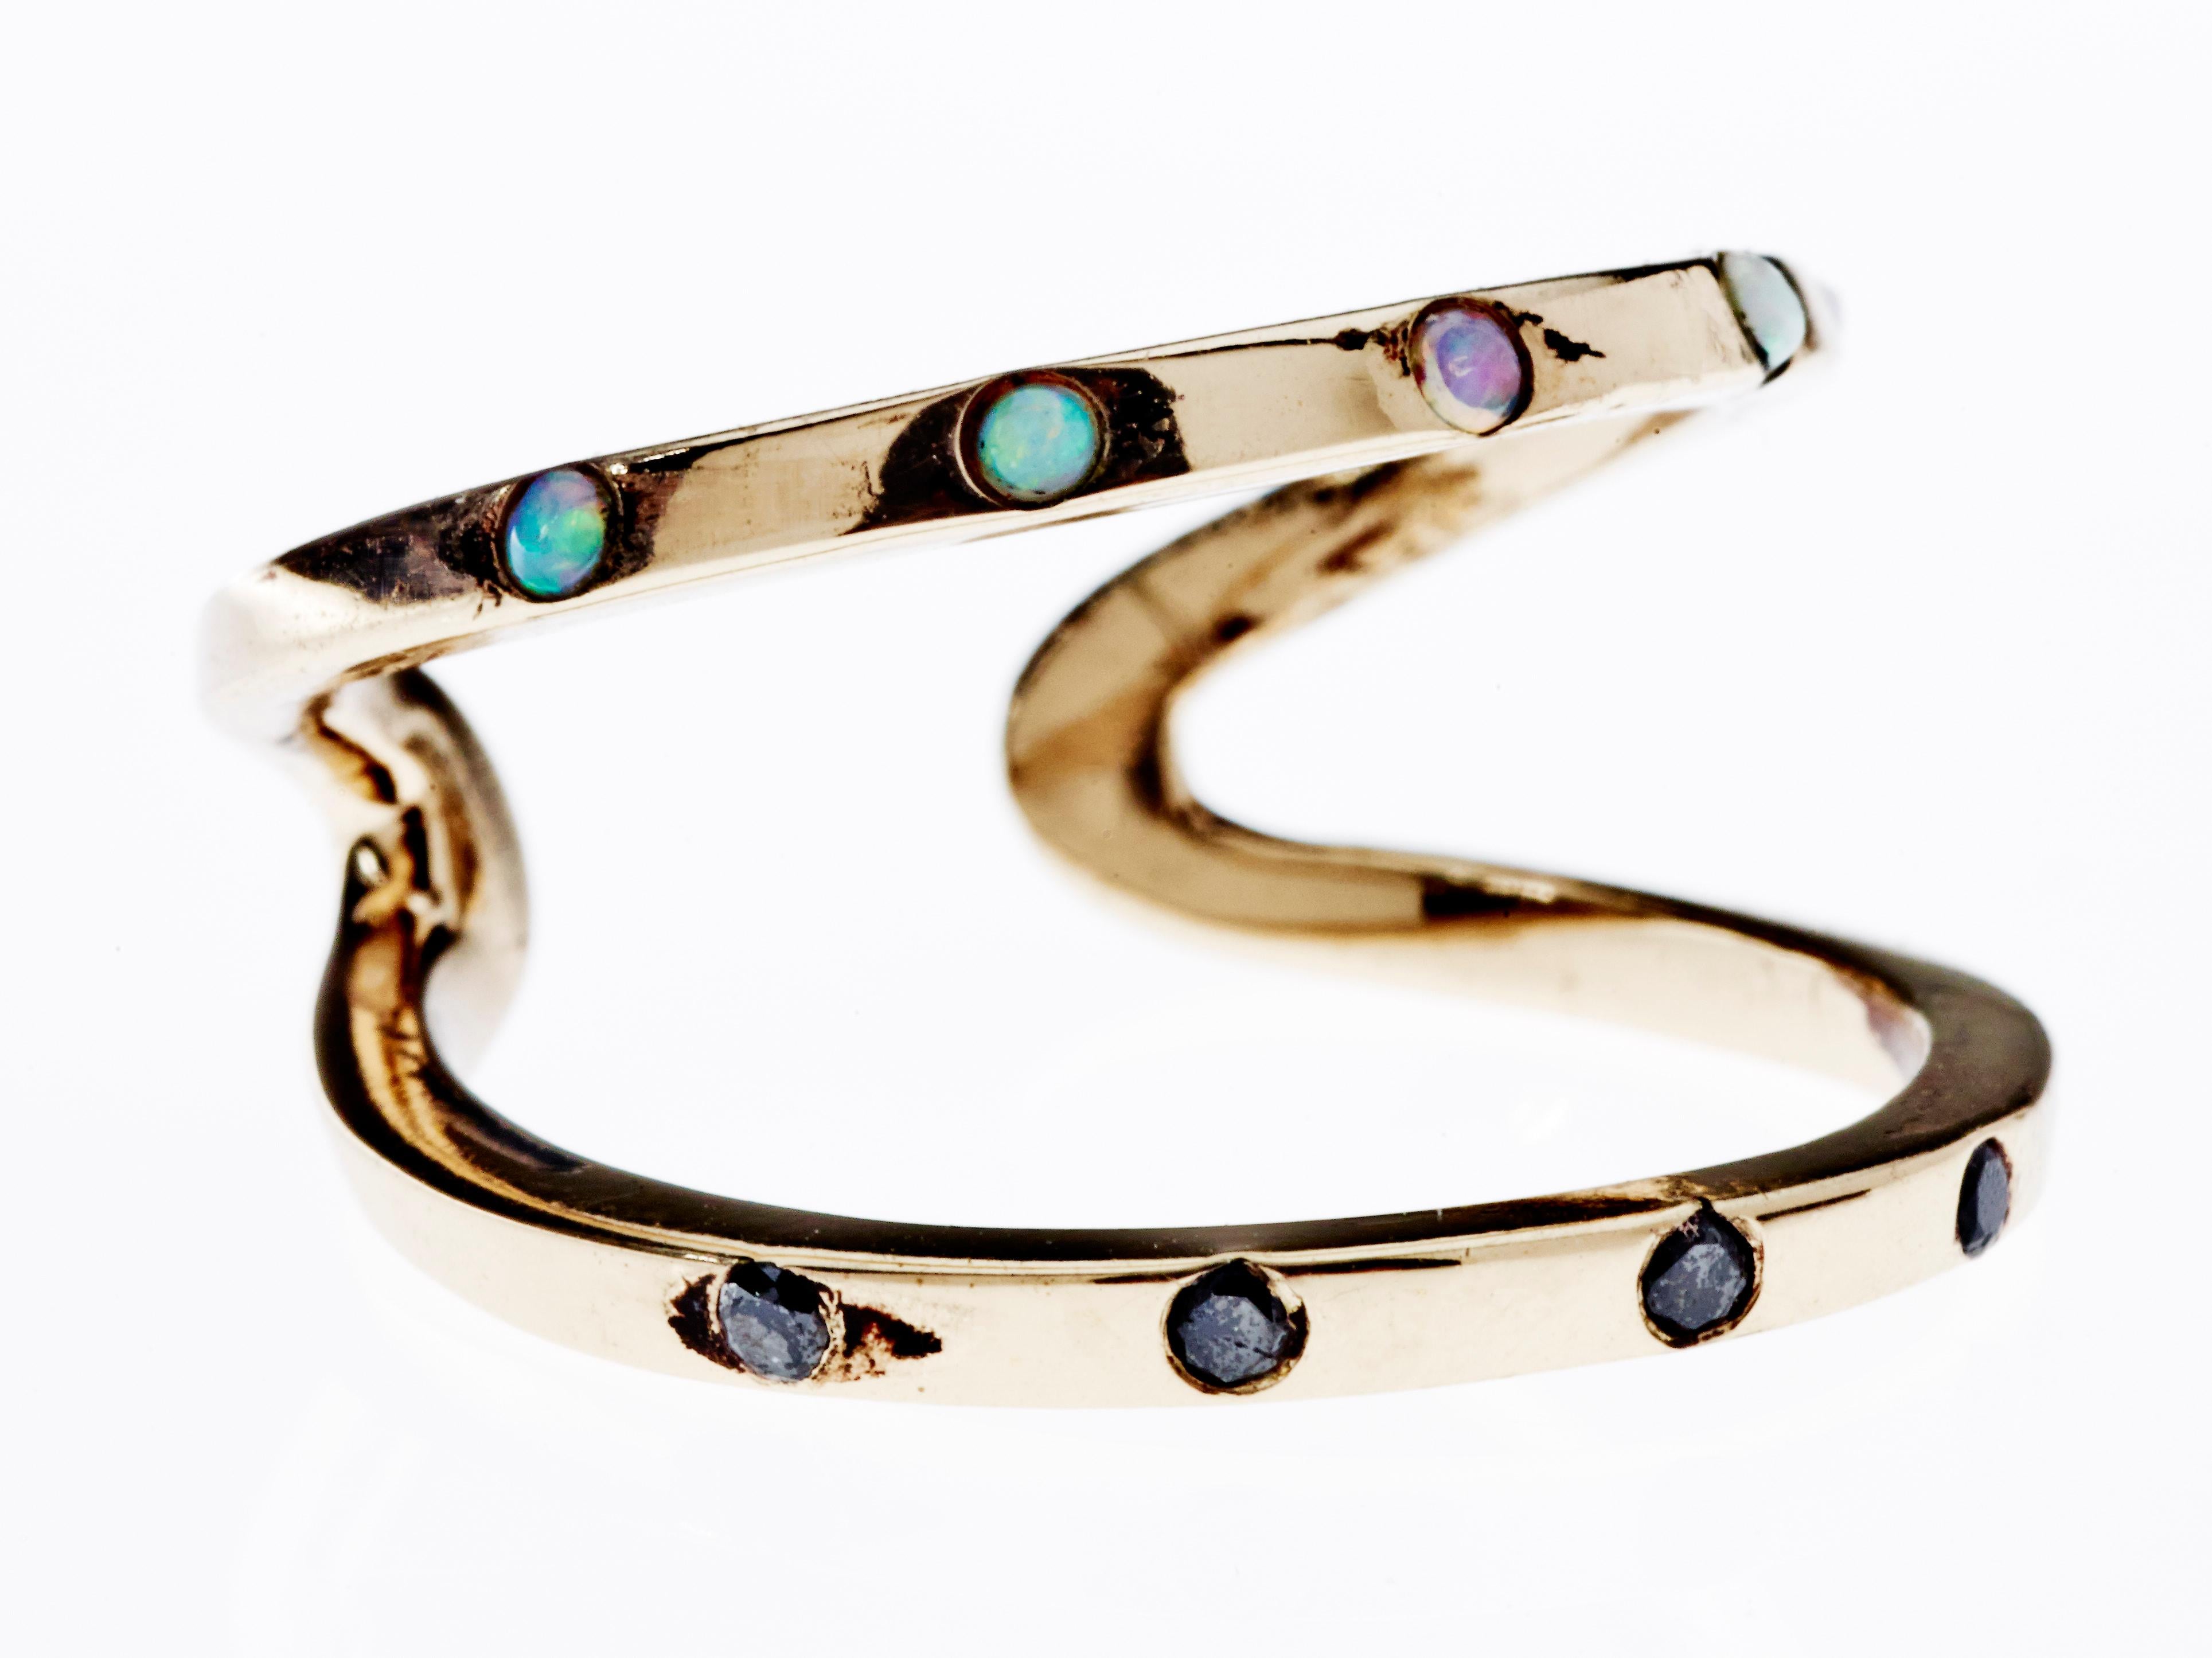 Double Band Ring Gold Black Diamond Opal Cocktail Ring J Dauphin

J DAUPHIN 